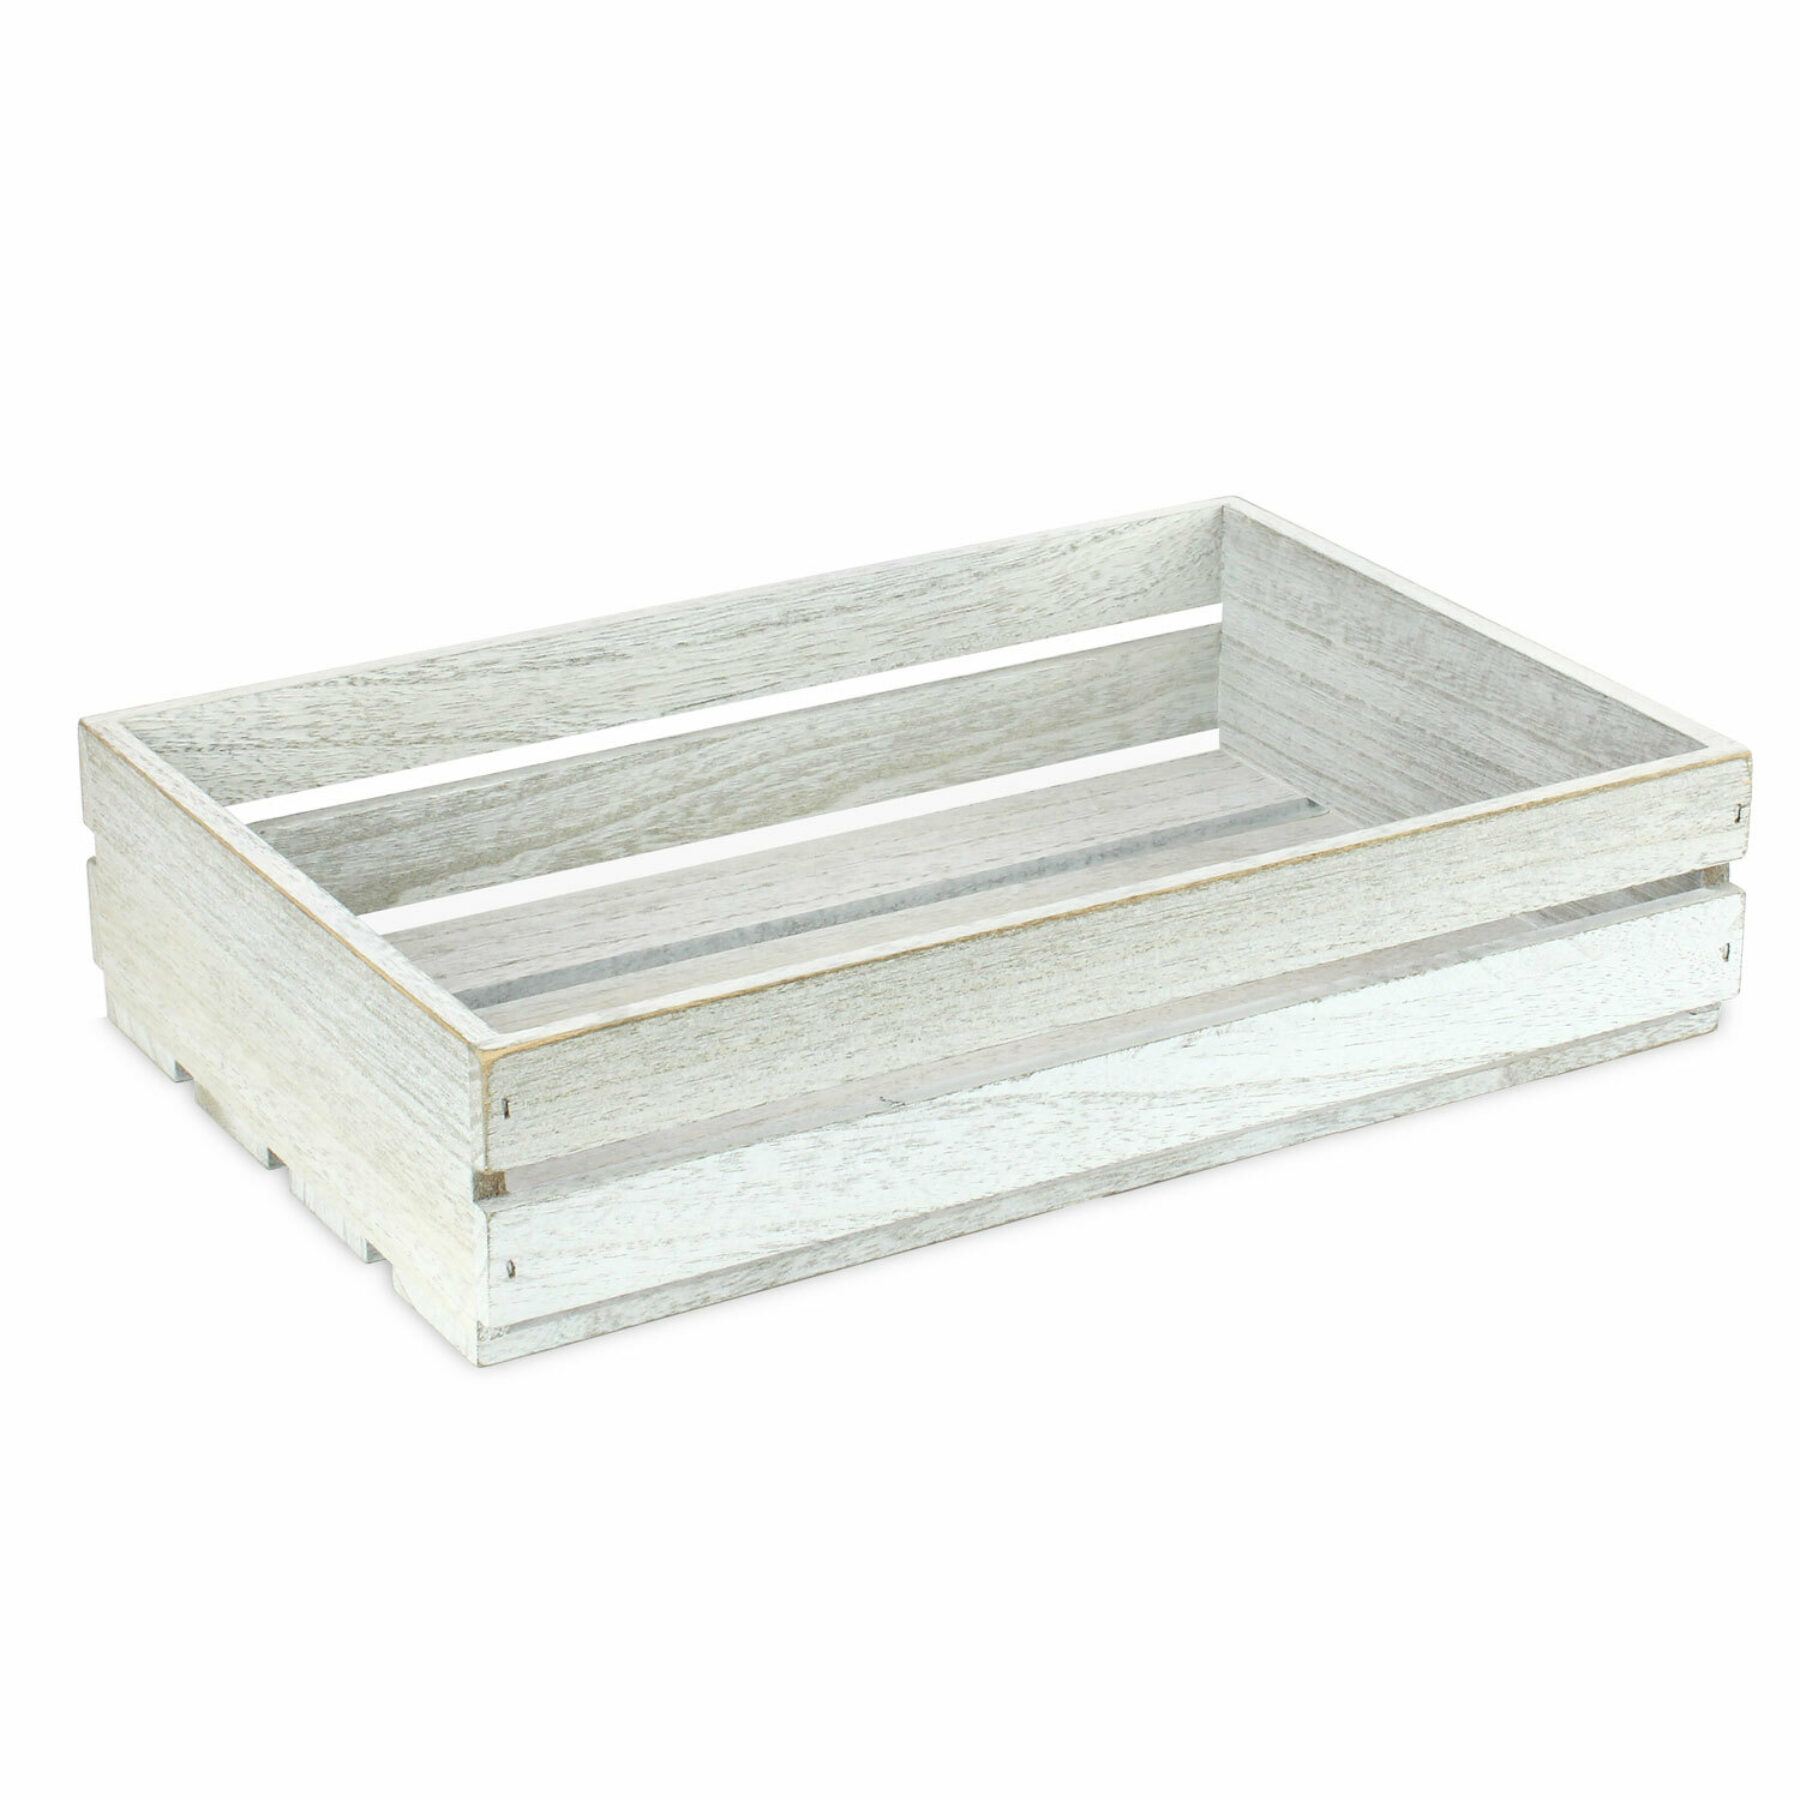 Large White Wooden Crate